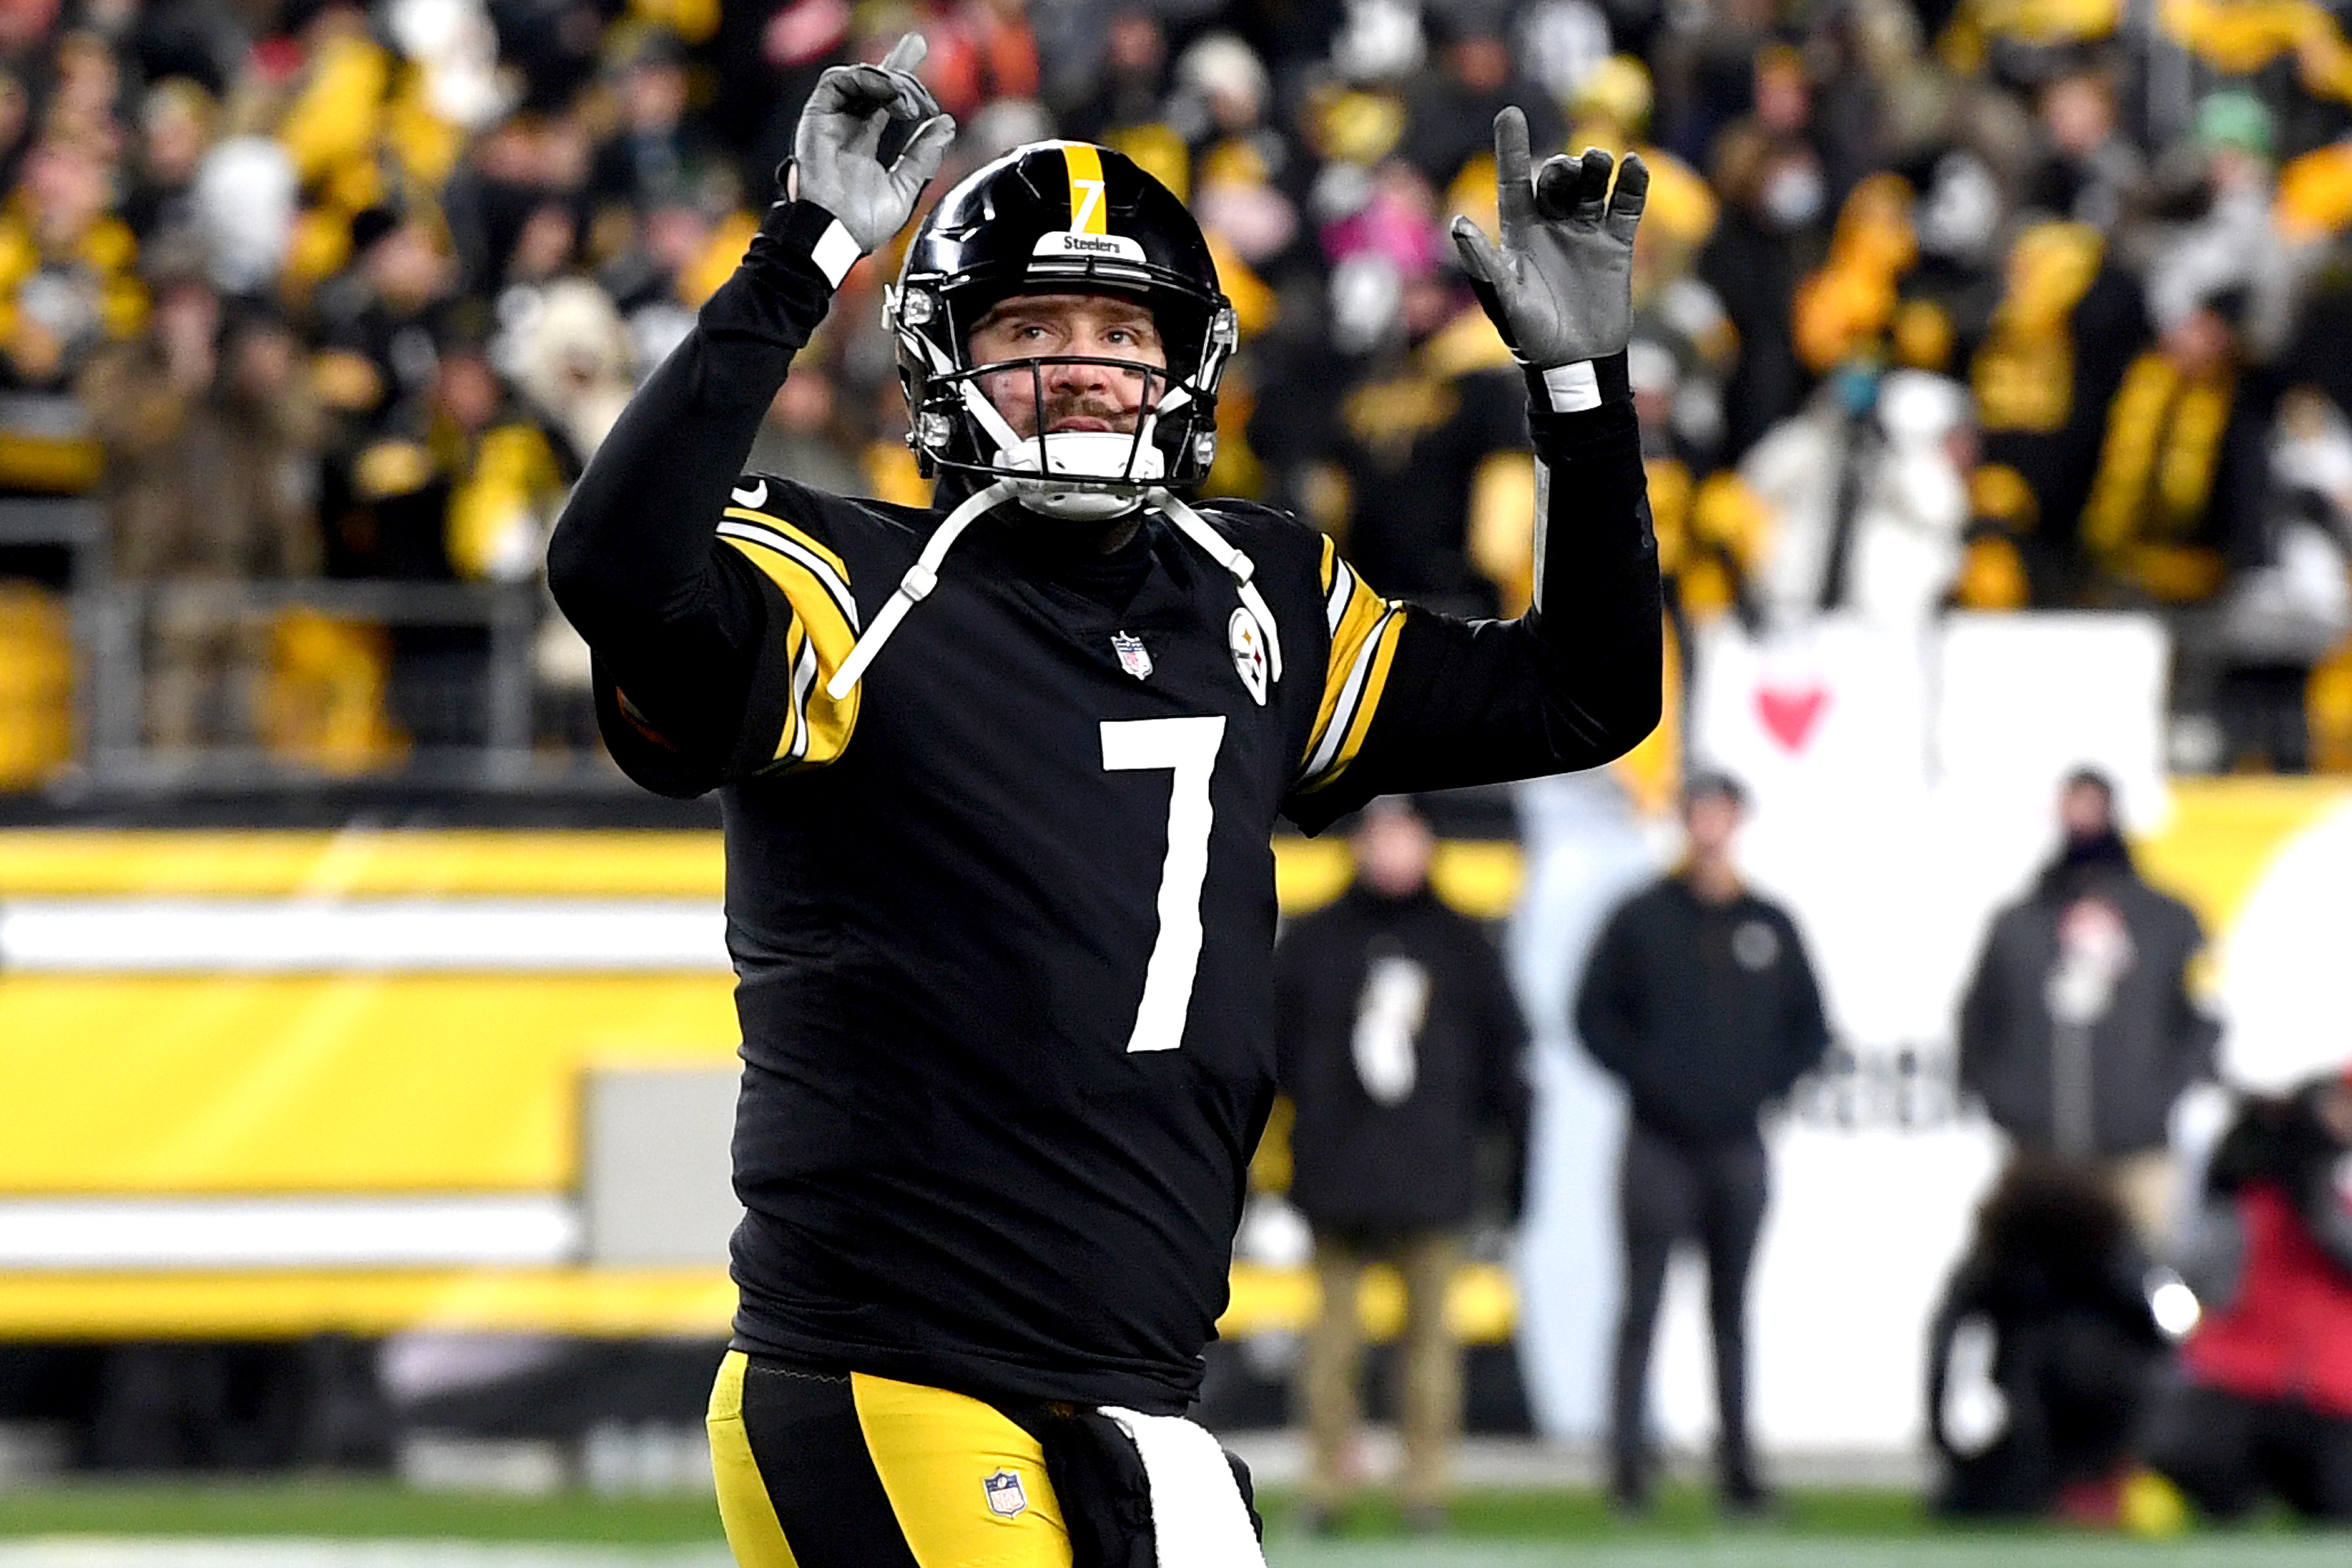 Ben Roethlisberger Emotional After Potential Last Game At Heinz Field